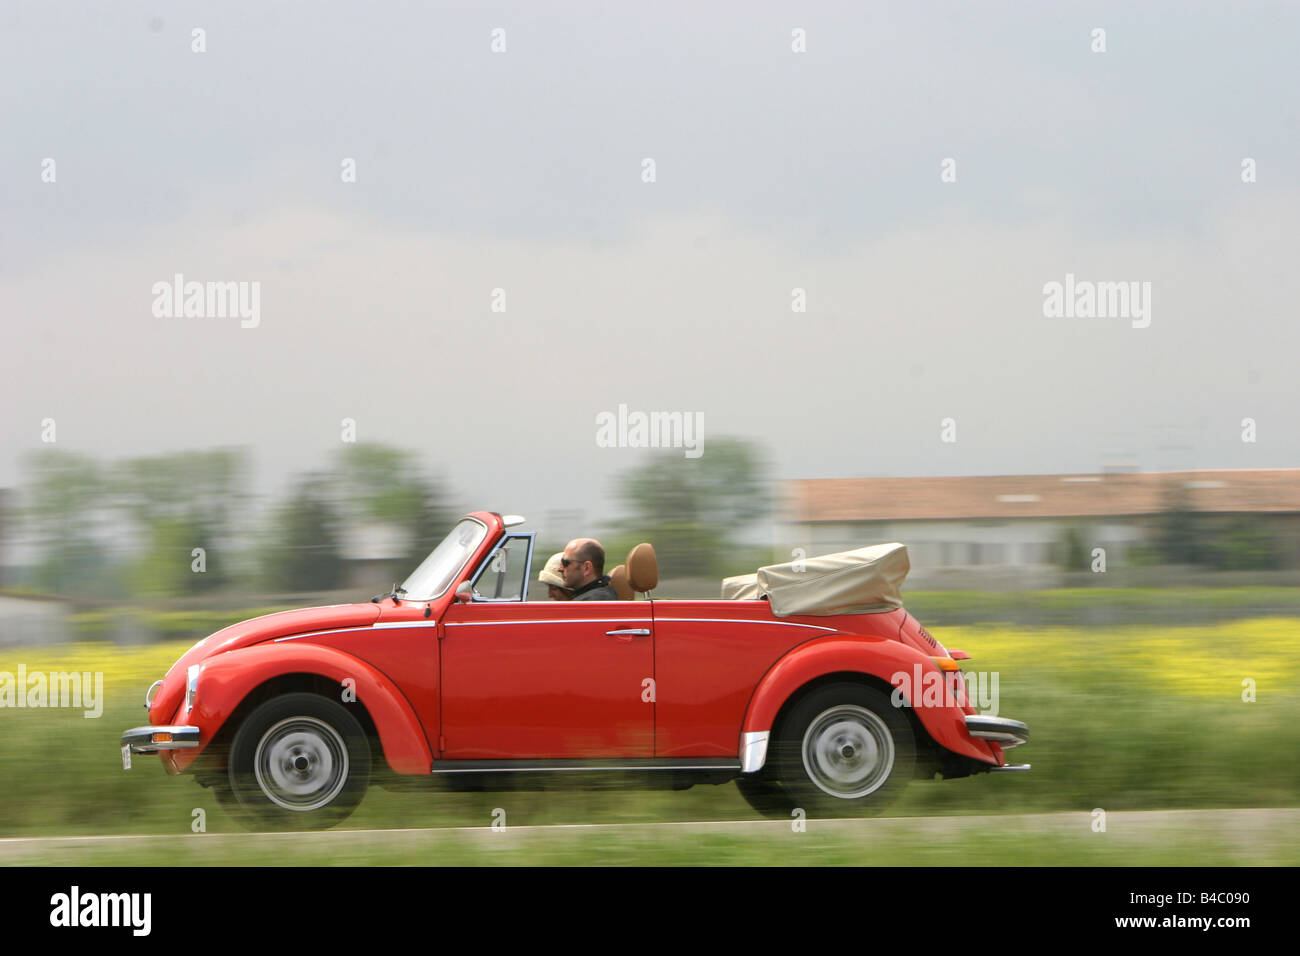 Car, VW Volkswagen Volkswagen beetle convertible, red, Vintage approx., sixties, The 70s, open top, driving, side view, country Stock Photo